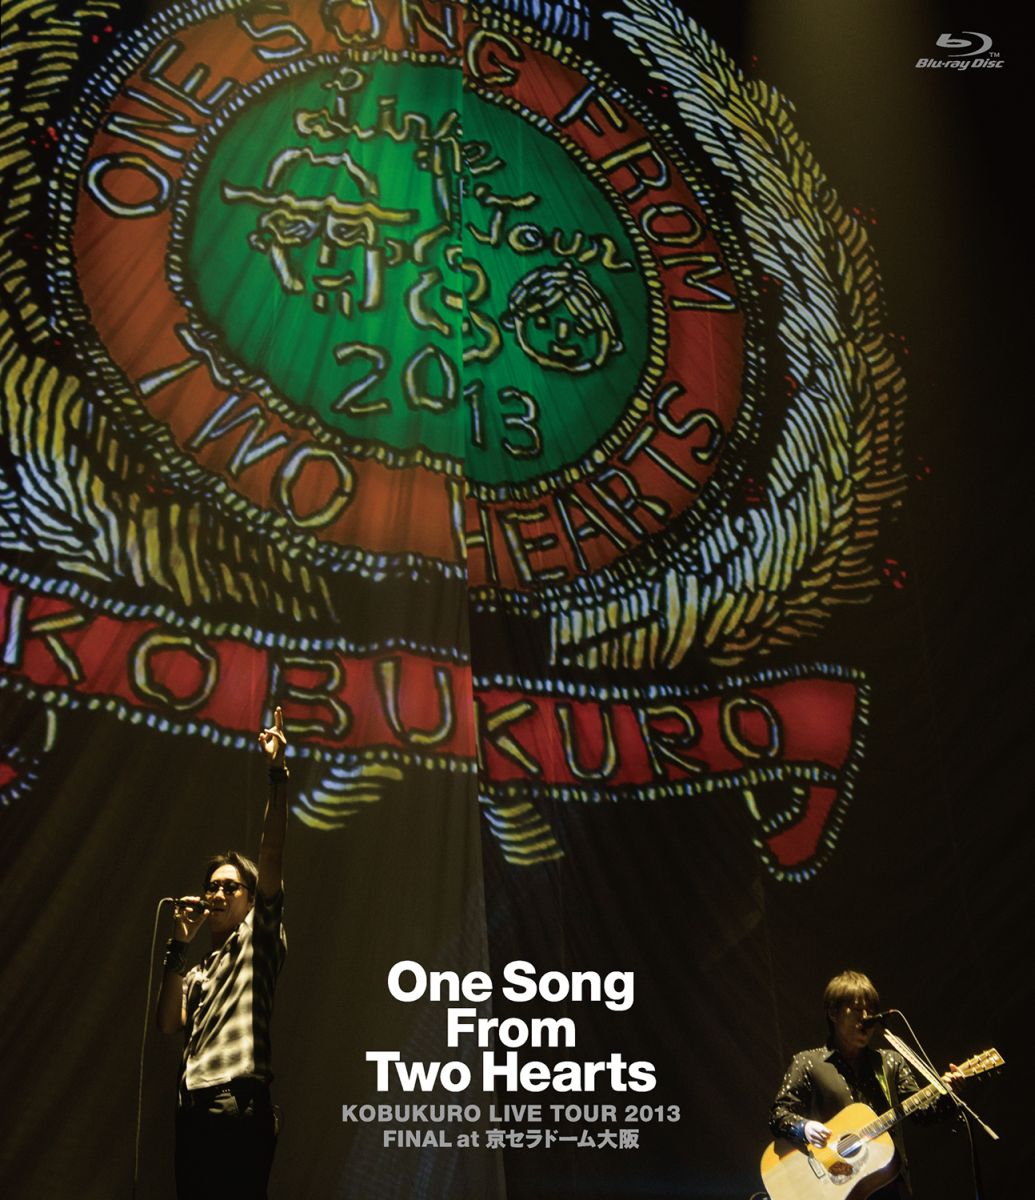 KOBUKURO LIVE TOUR 2013 “One Song From Two Hearts” FINAL at 京セラドーム大阪 【Blu-ray】